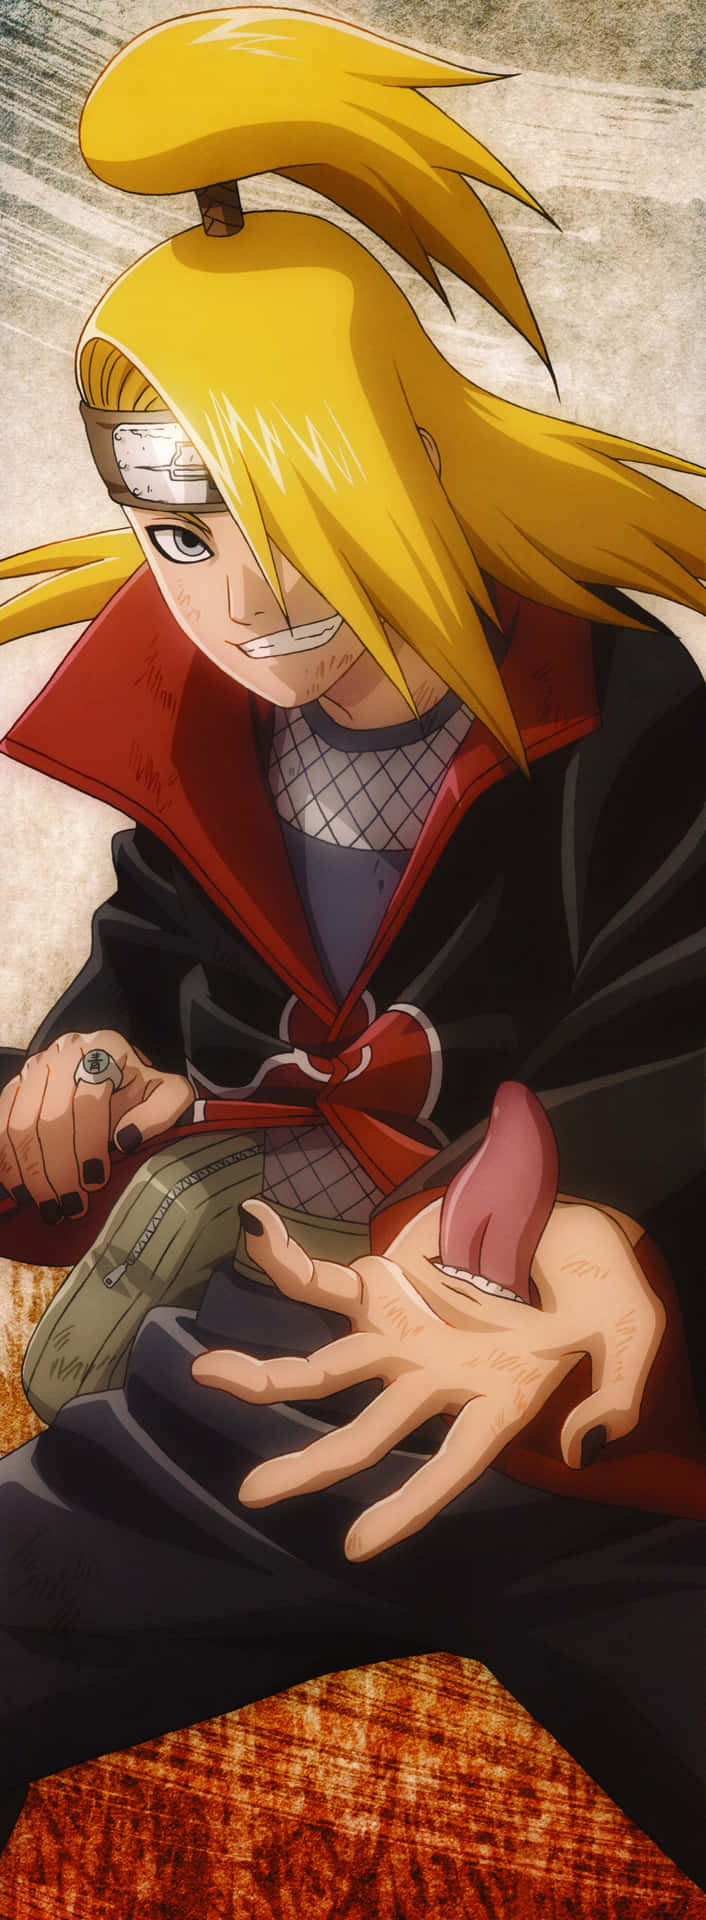 Show Your Anime Loyalty With This Stunning Tsunade Iphone Wallpaper Wallpaper